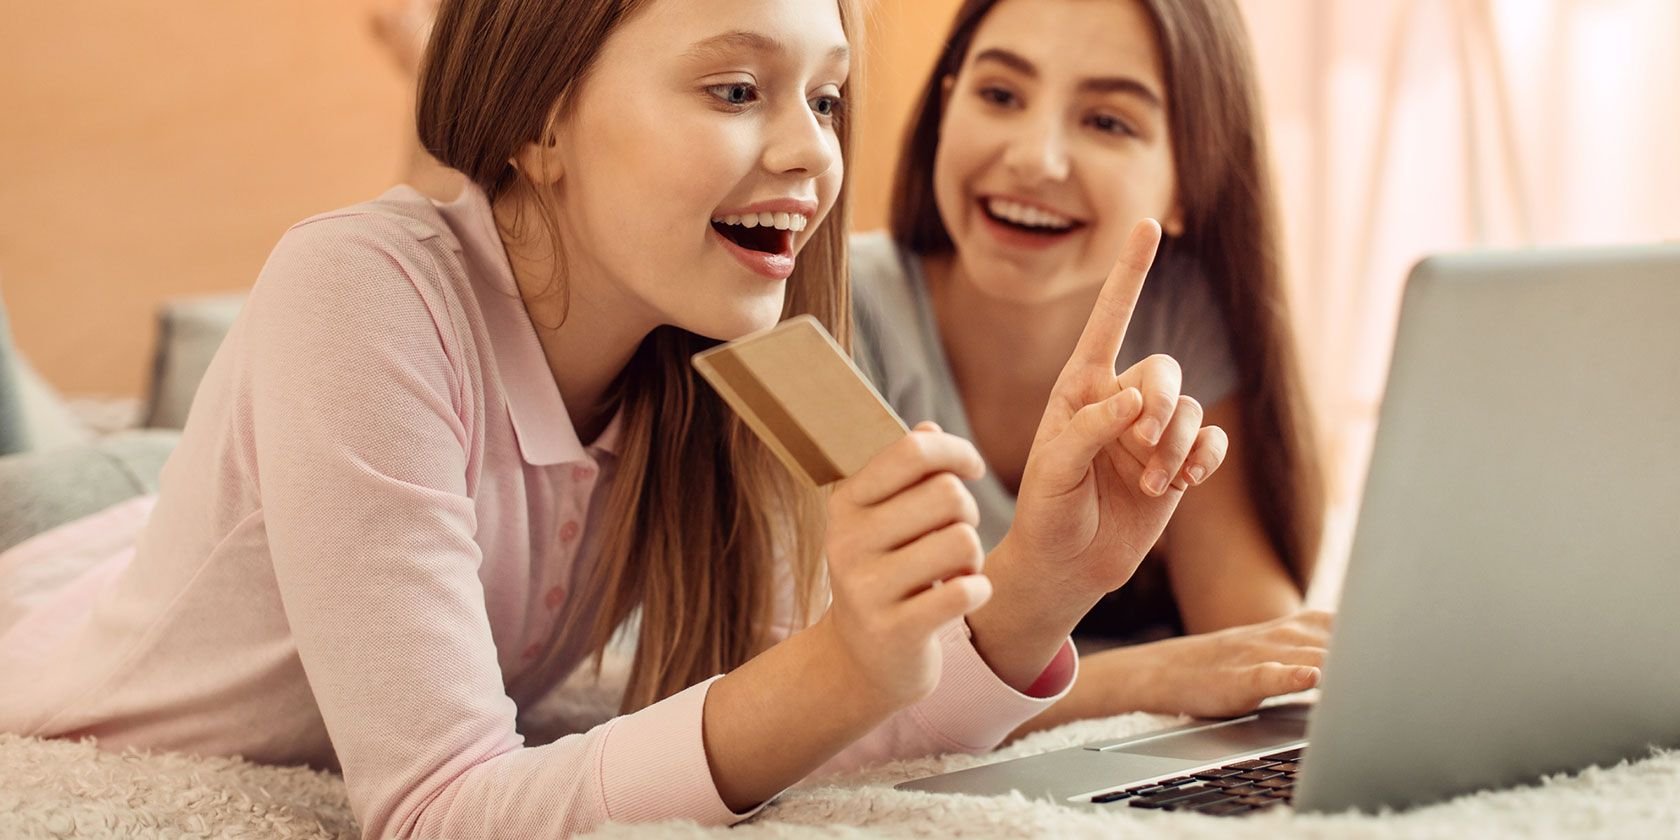 The Best PayPal Alternatives for Teenagers Under 18